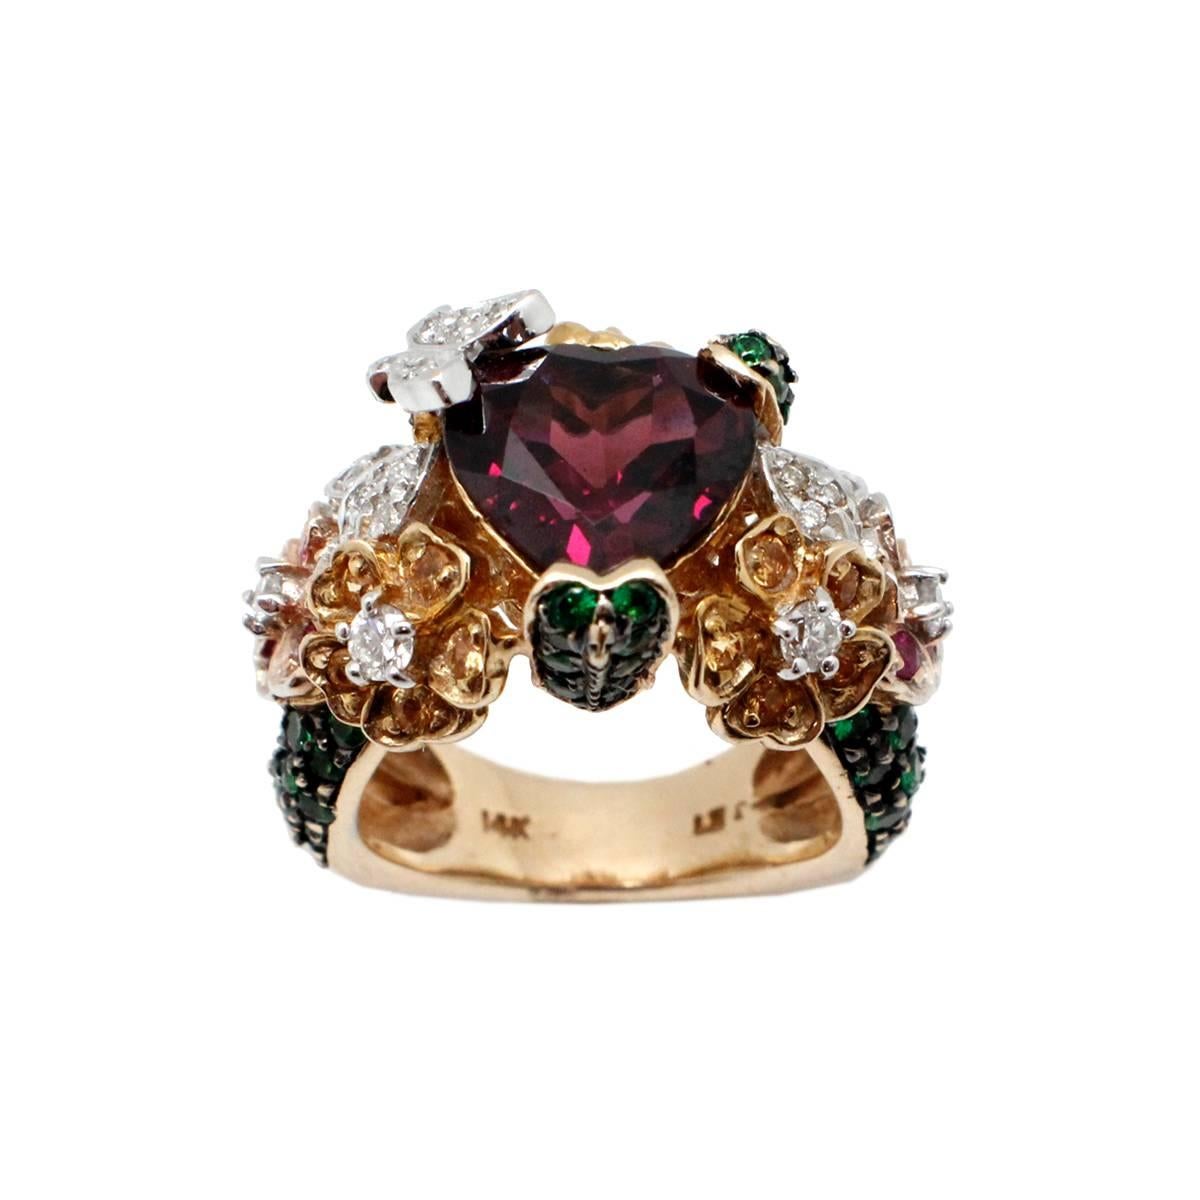 This ring is stunning! It is made in both 14k yellow and 14k white gold. The ring features a large heart-cut pyrope garnet at its center, and that stone is accented by other vibrant gemstones. The gemstones include 23 round brilliant diamonds, 66